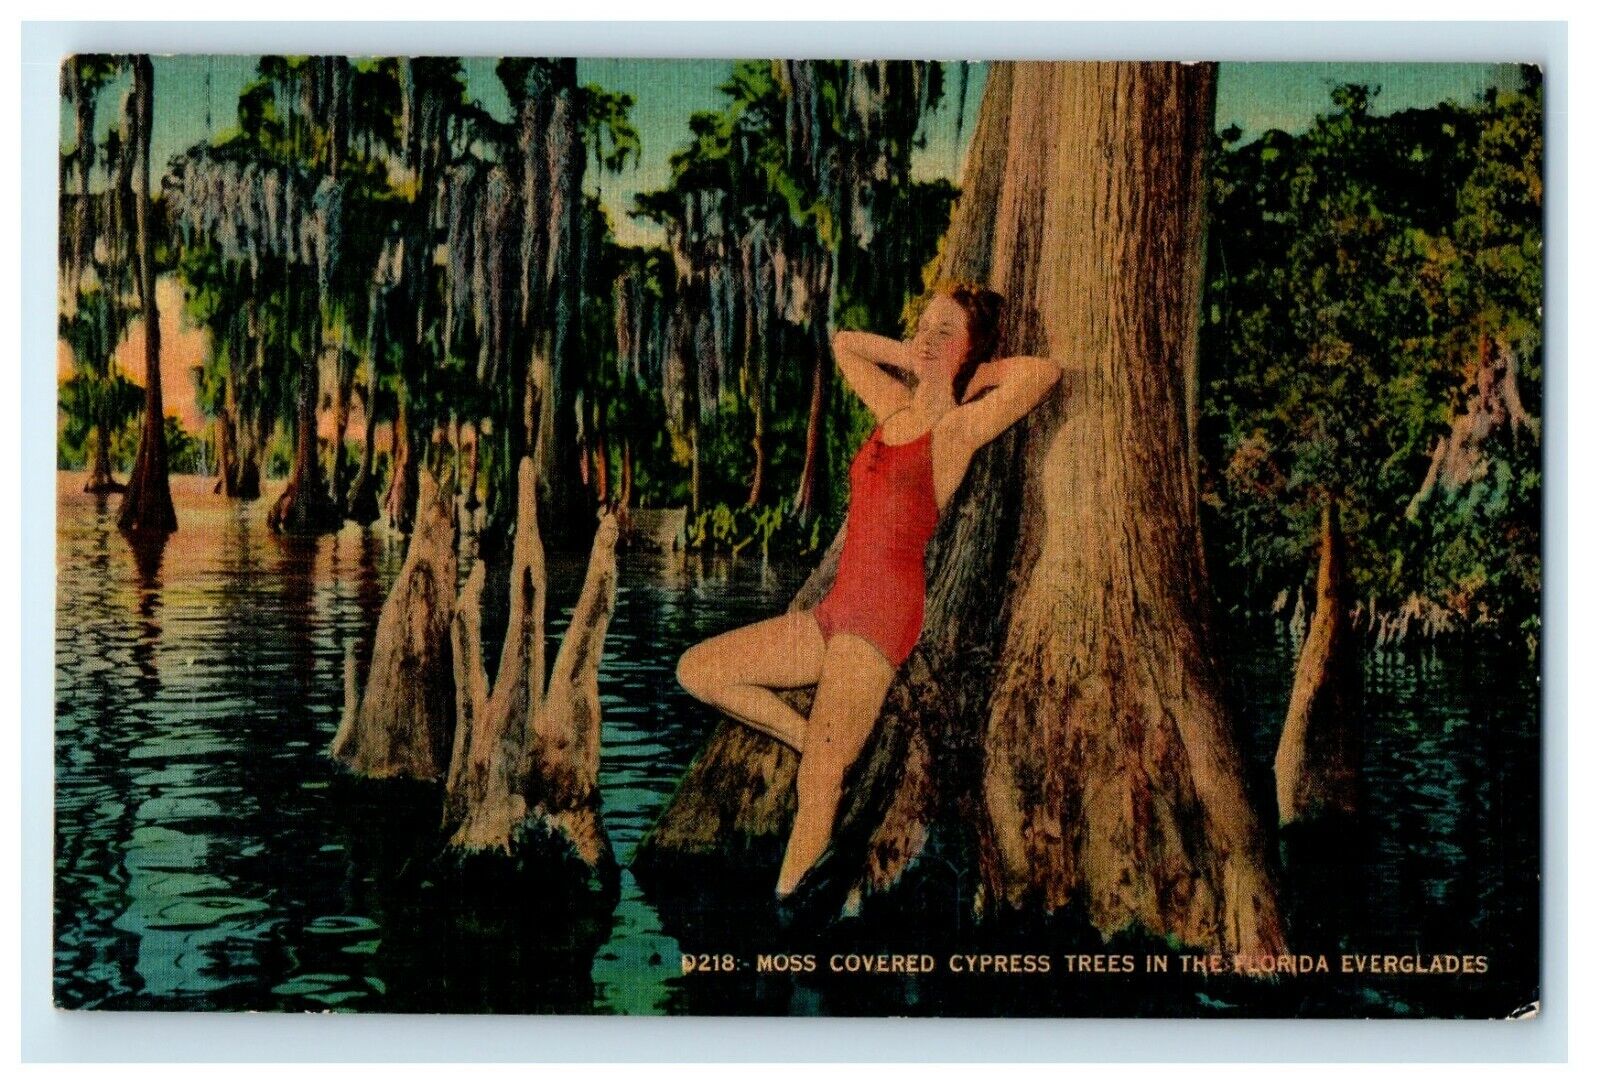 1942 Moss Covered Cypress Trees In Florida Everglades Pretty Women Suit Postcard